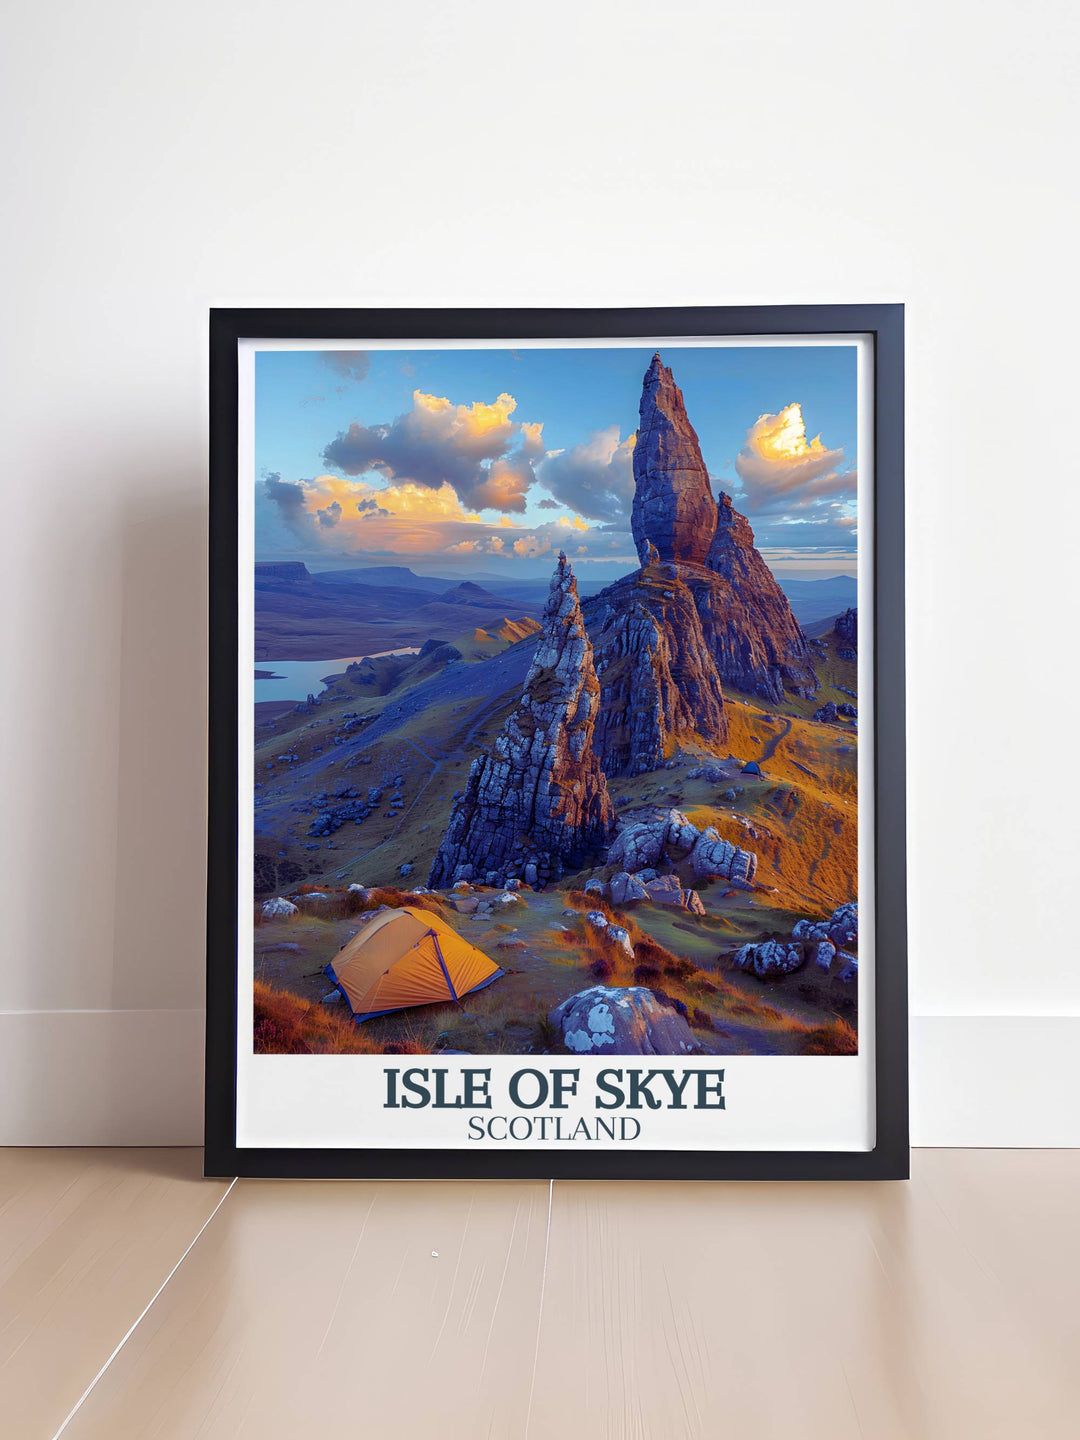 Elegant Scotland poster featuring the serene landscapes of the Isle of Skye, ideal for art lovers and travelers alike